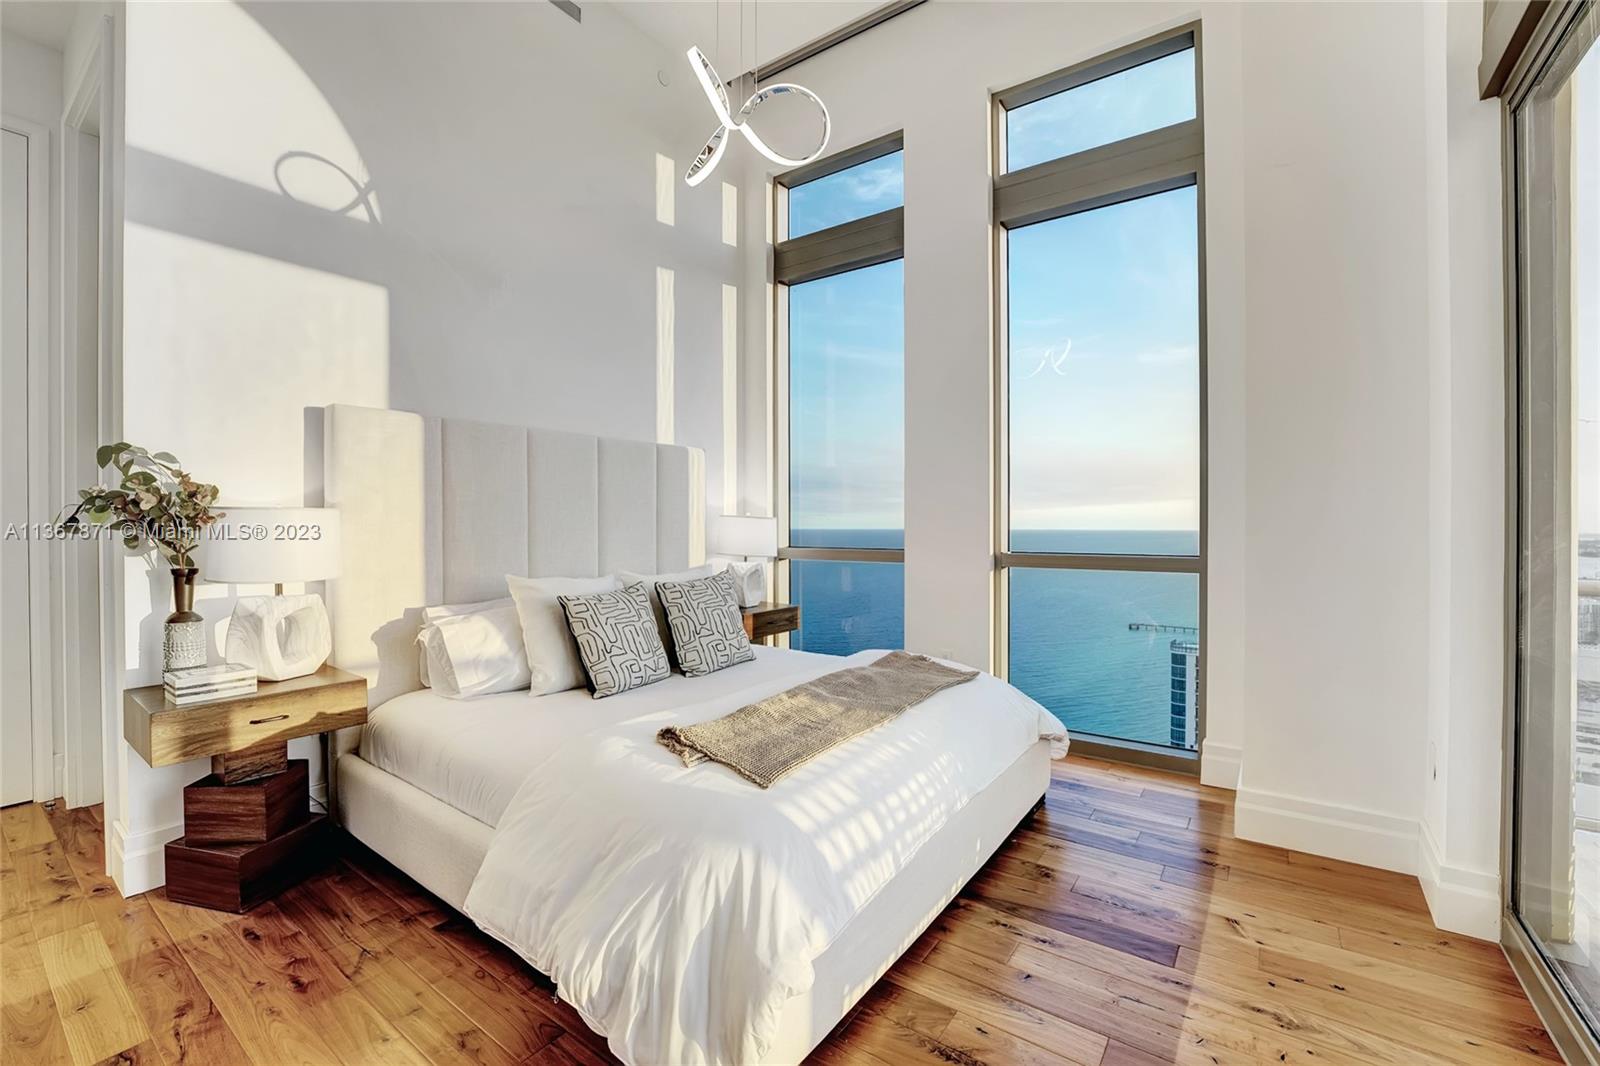 Bedroom 4 with stunning views of the beach, Miami and the intracoastal. Terrace is just steps in front of you. Perhaps a walk out outside for a private swim at the pool?